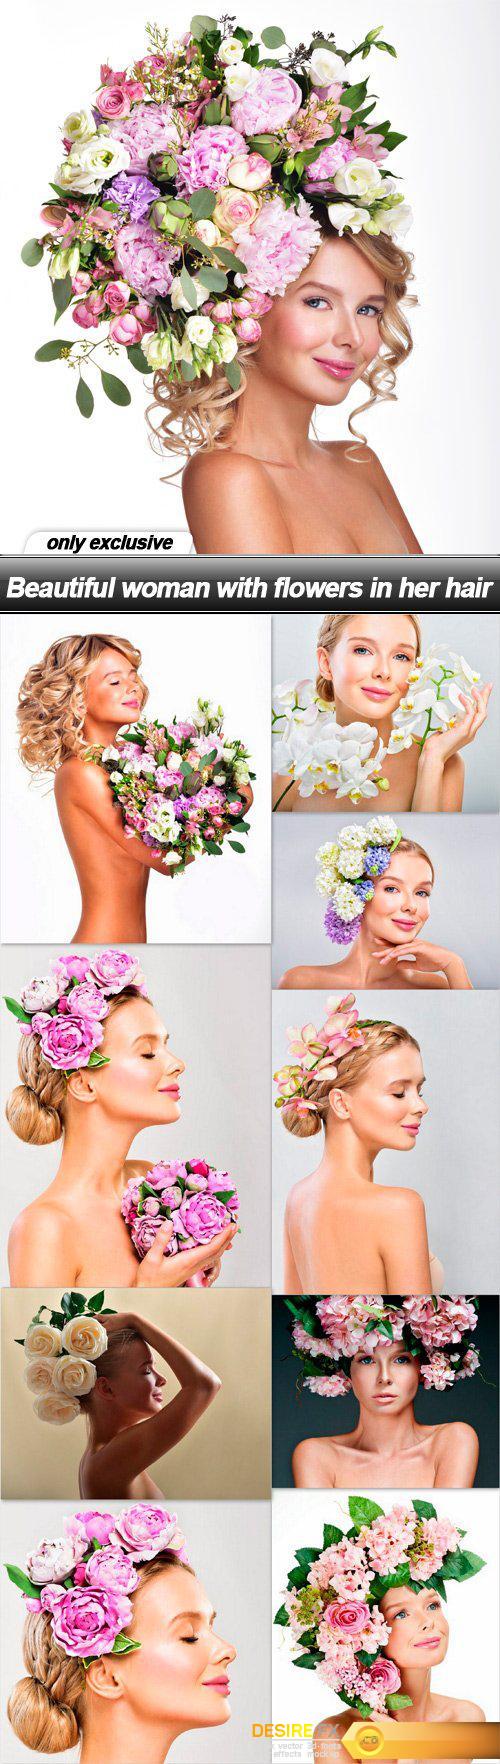 Beautiful woman with flowers in her hair - 10 UHQ JPEG